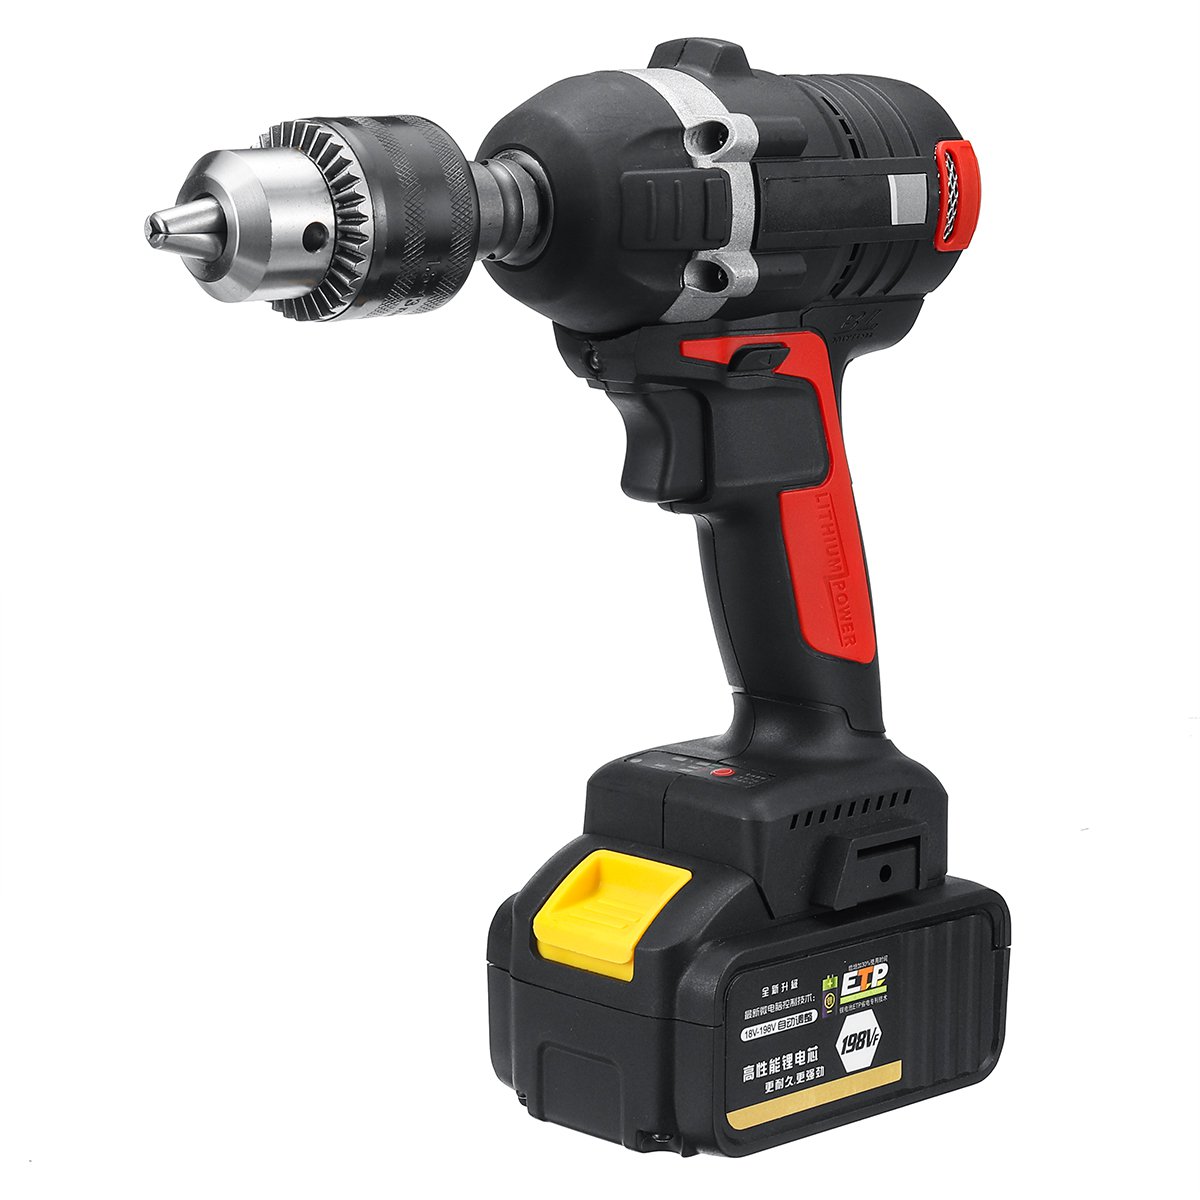 

198VF 520N.M High Torque Multipurpose Cordless Brushless Electric Wrench Drill Driver 2 Li-ion Batteries Home Repair Power Tool